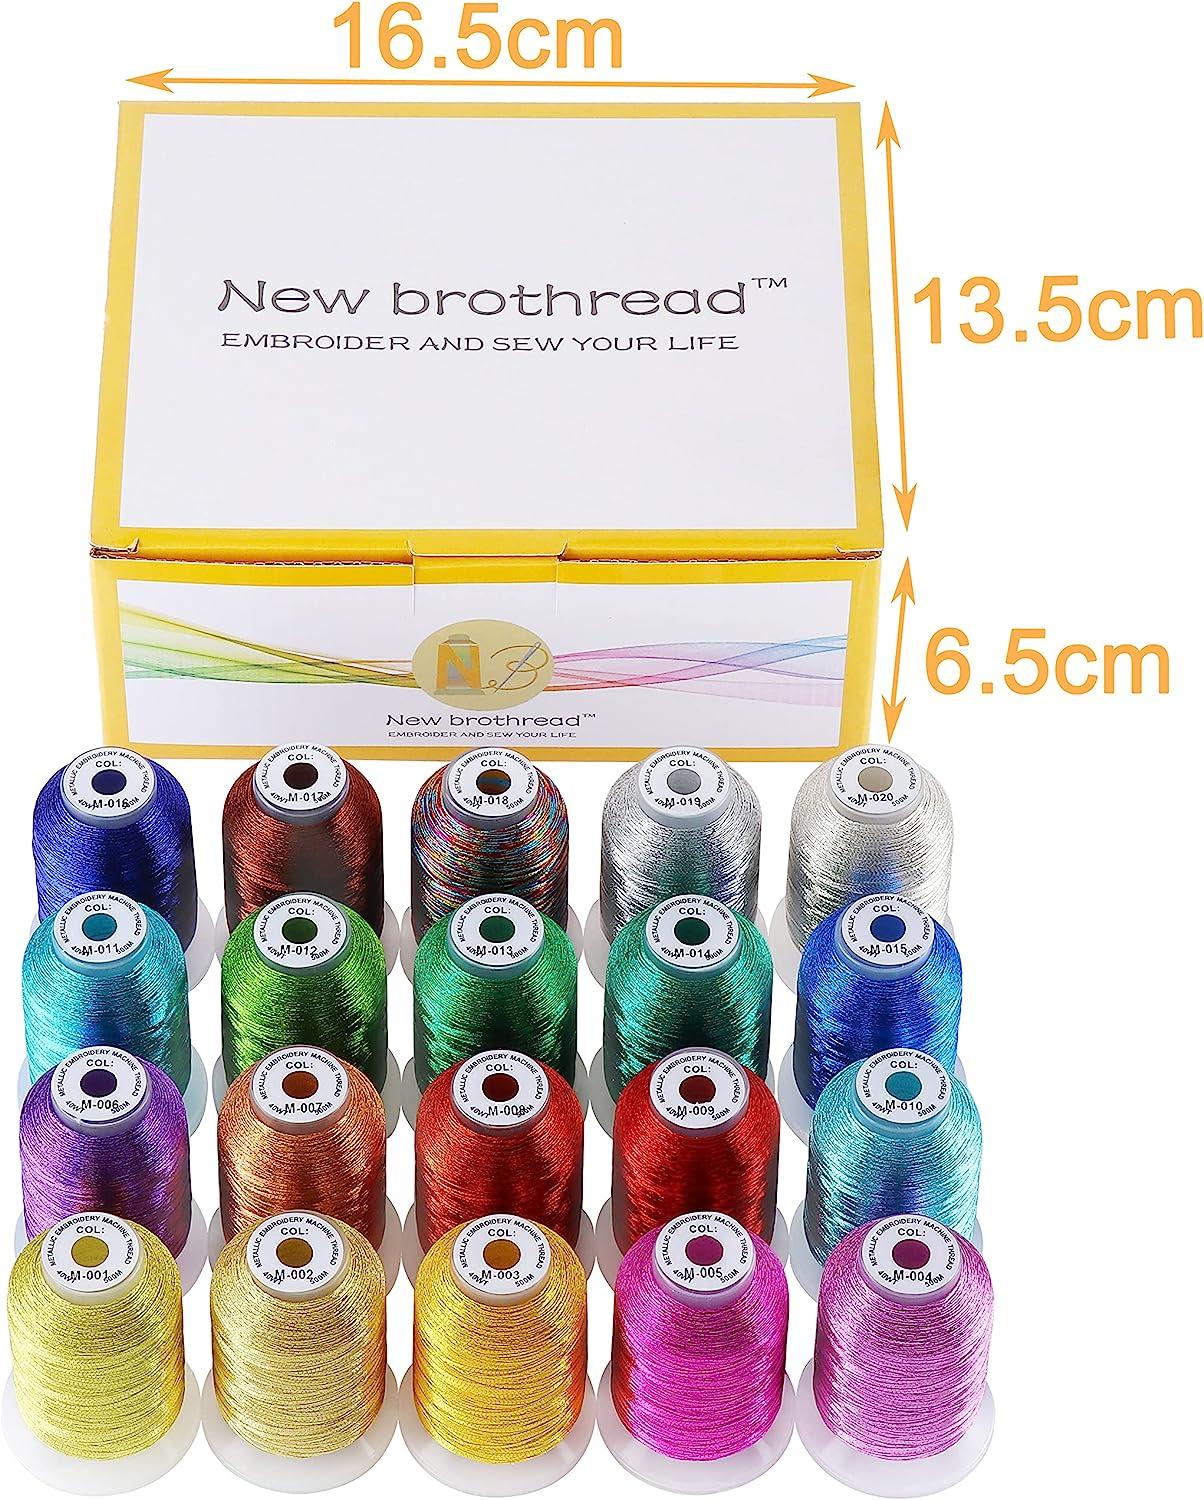 New brothread 20 Assorted Colors Metallic Embroidery Machine Thread Kit  500M (550Y) Each Spool for Computerized Embroidery and Decorative Sewing 20  Metallic Colors